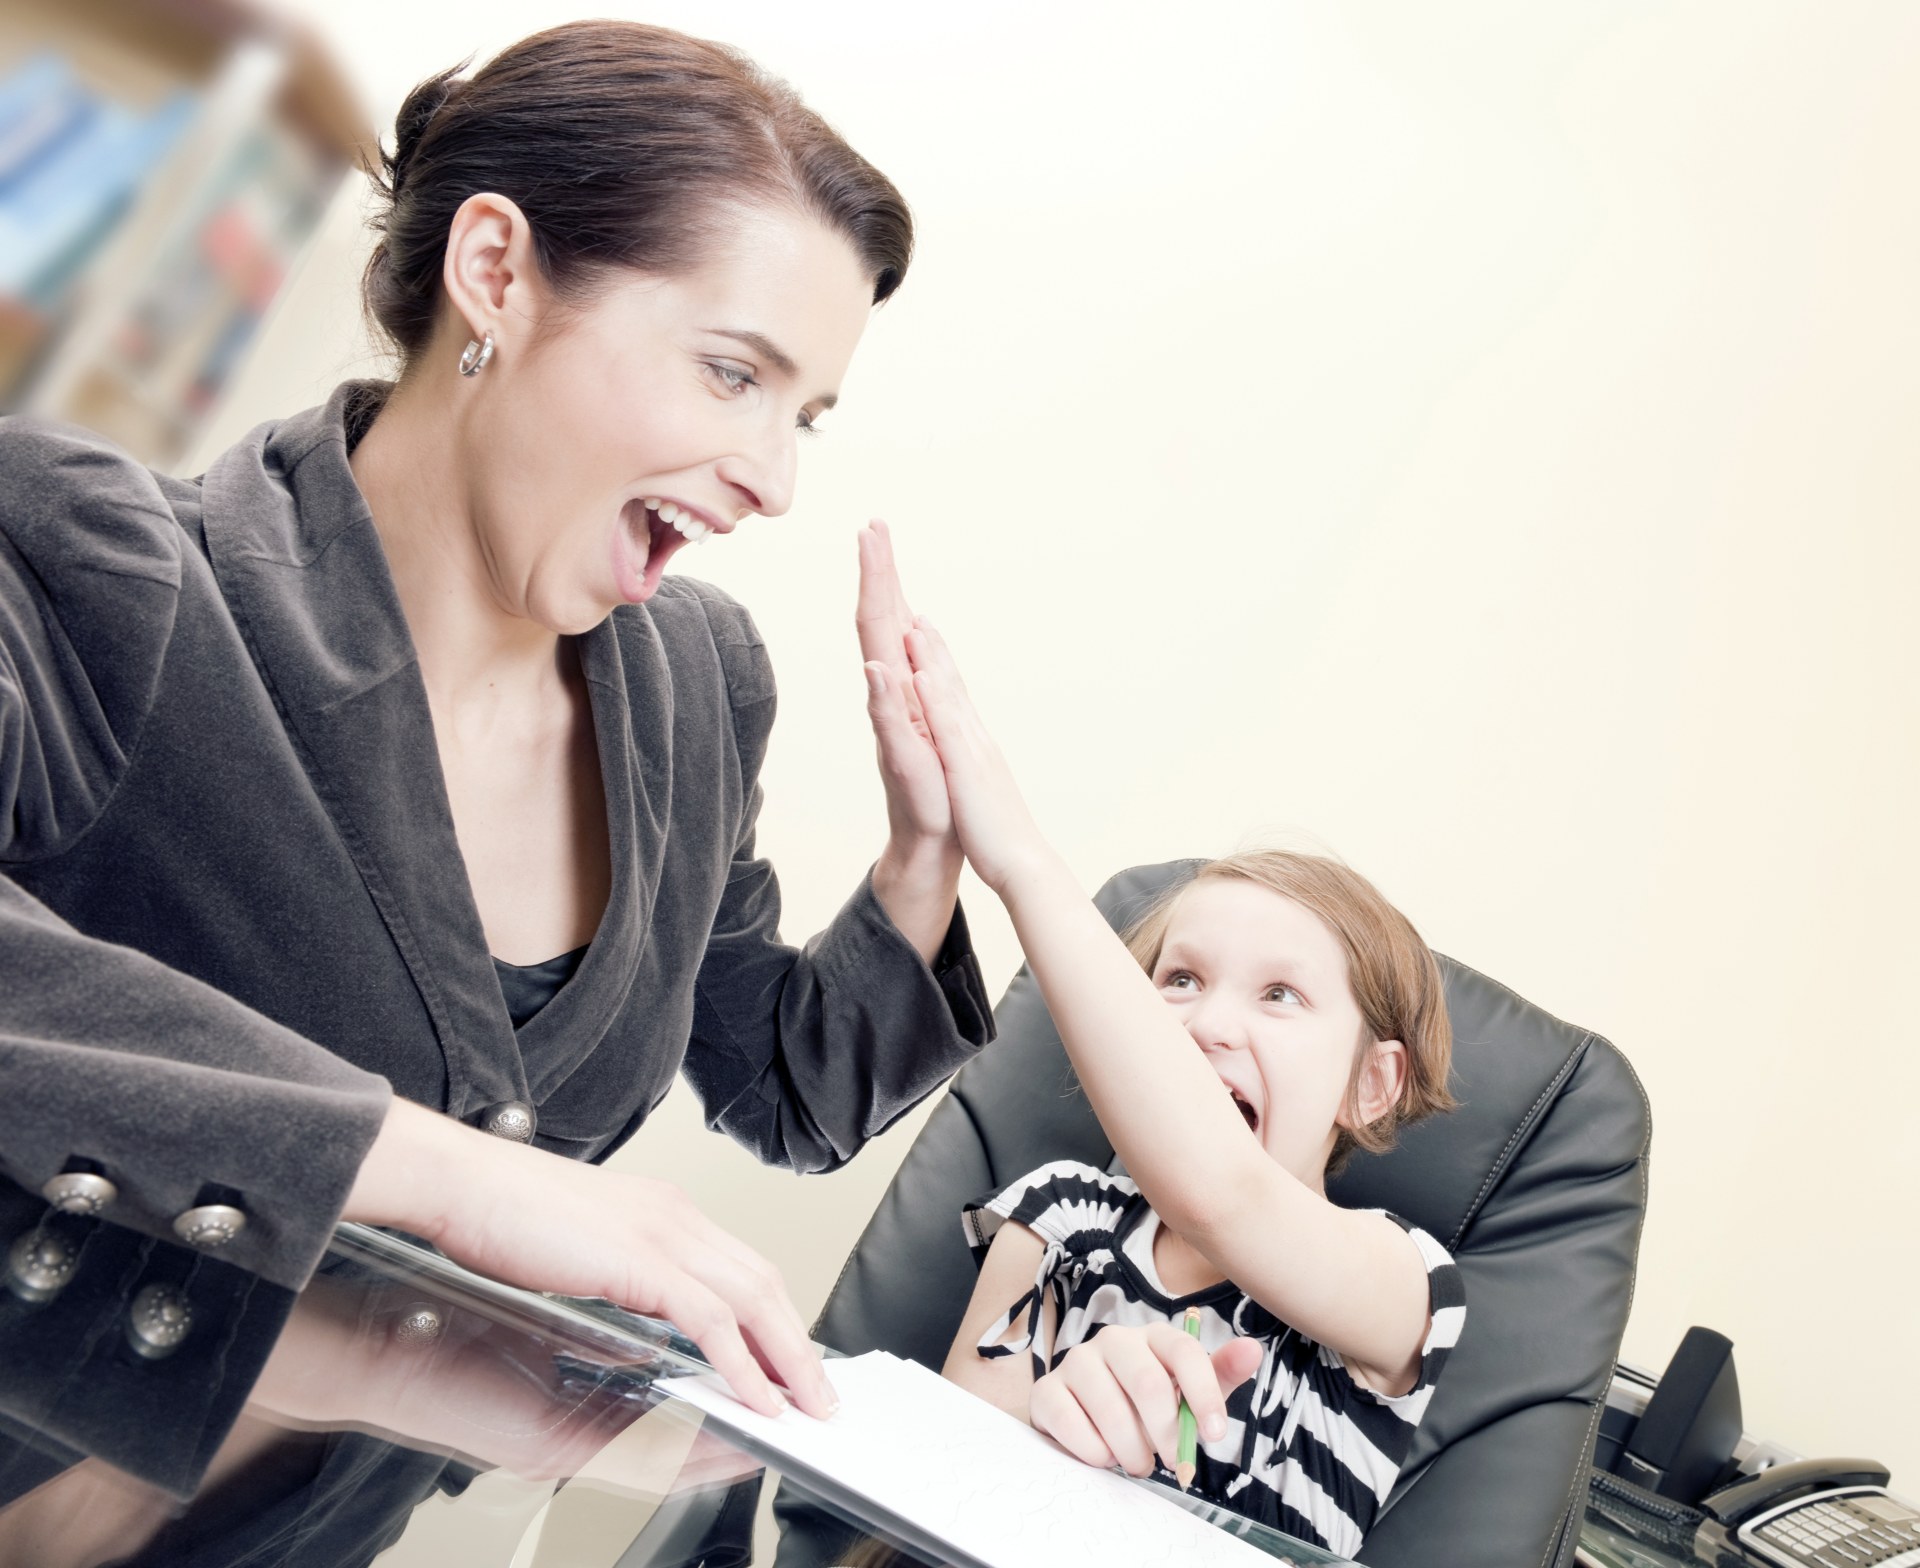 Woman with a child at work